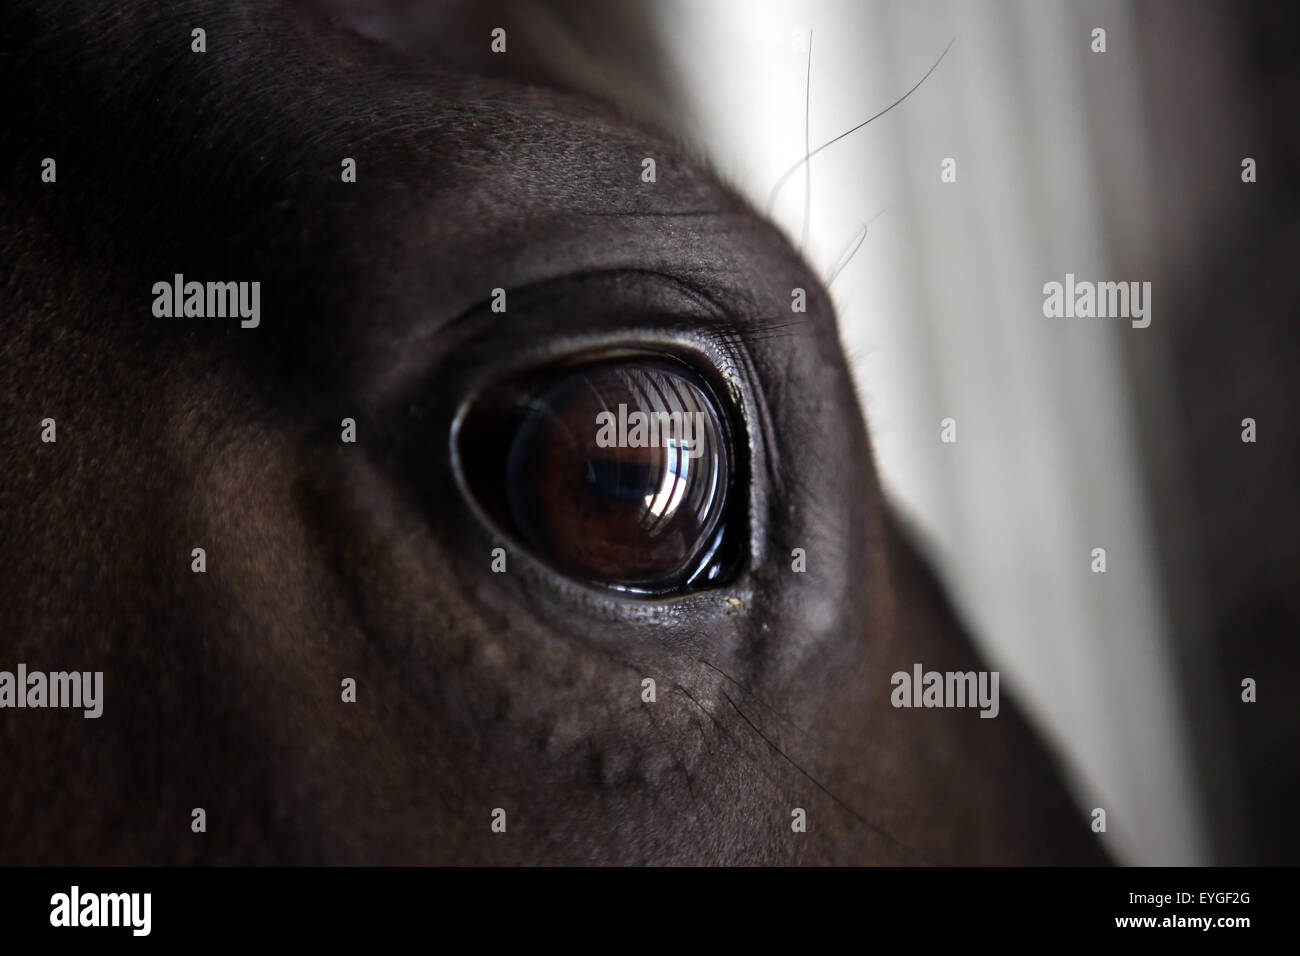 Oberoderwitz, Germany, Gitterstaebe a box are reflected in the eye of a horse Stock Photo